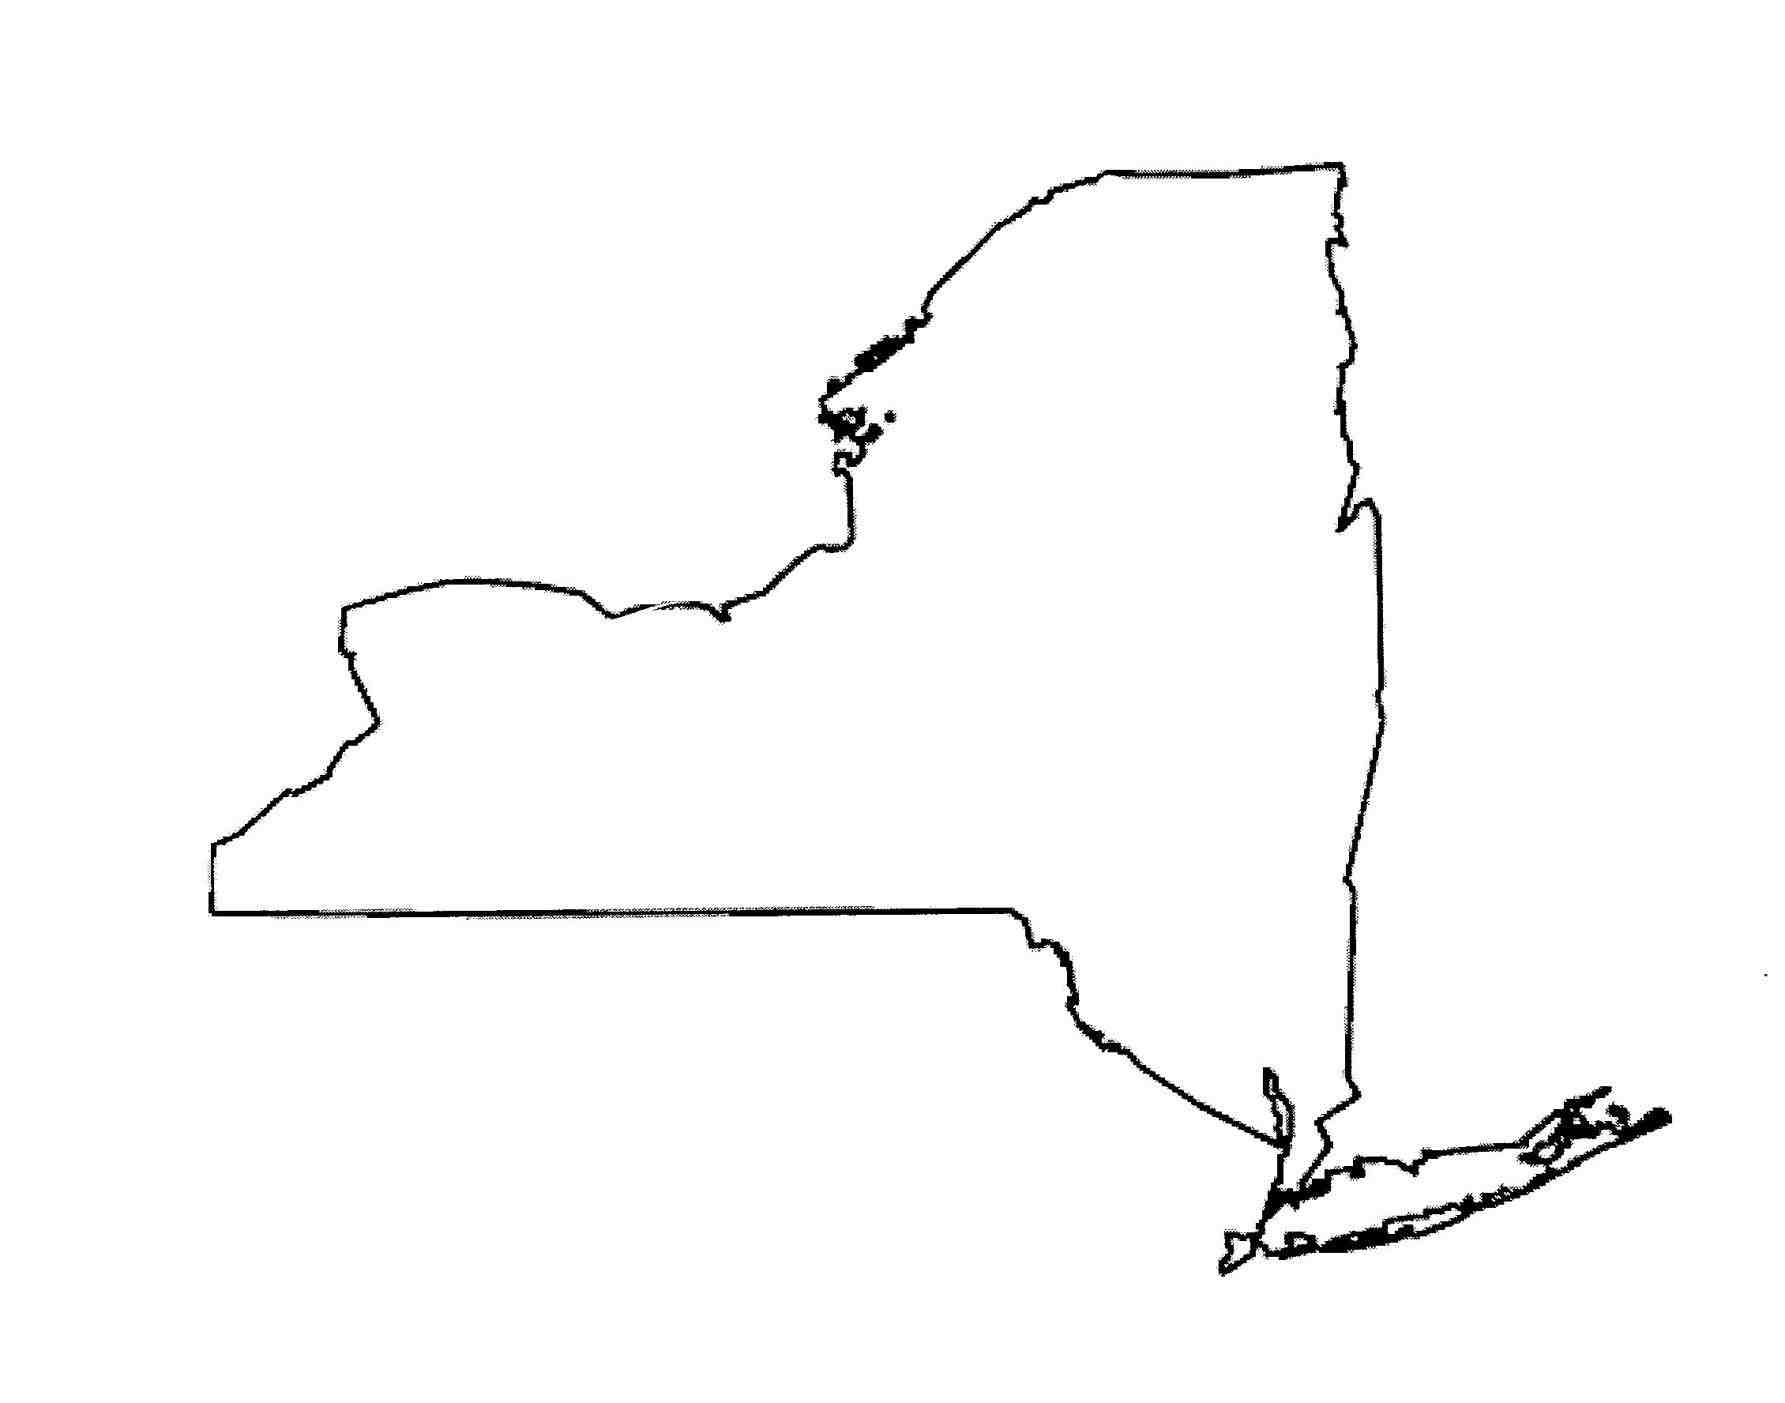 New York Coloring Pages Printable At Getcolorings.com | Free Printable